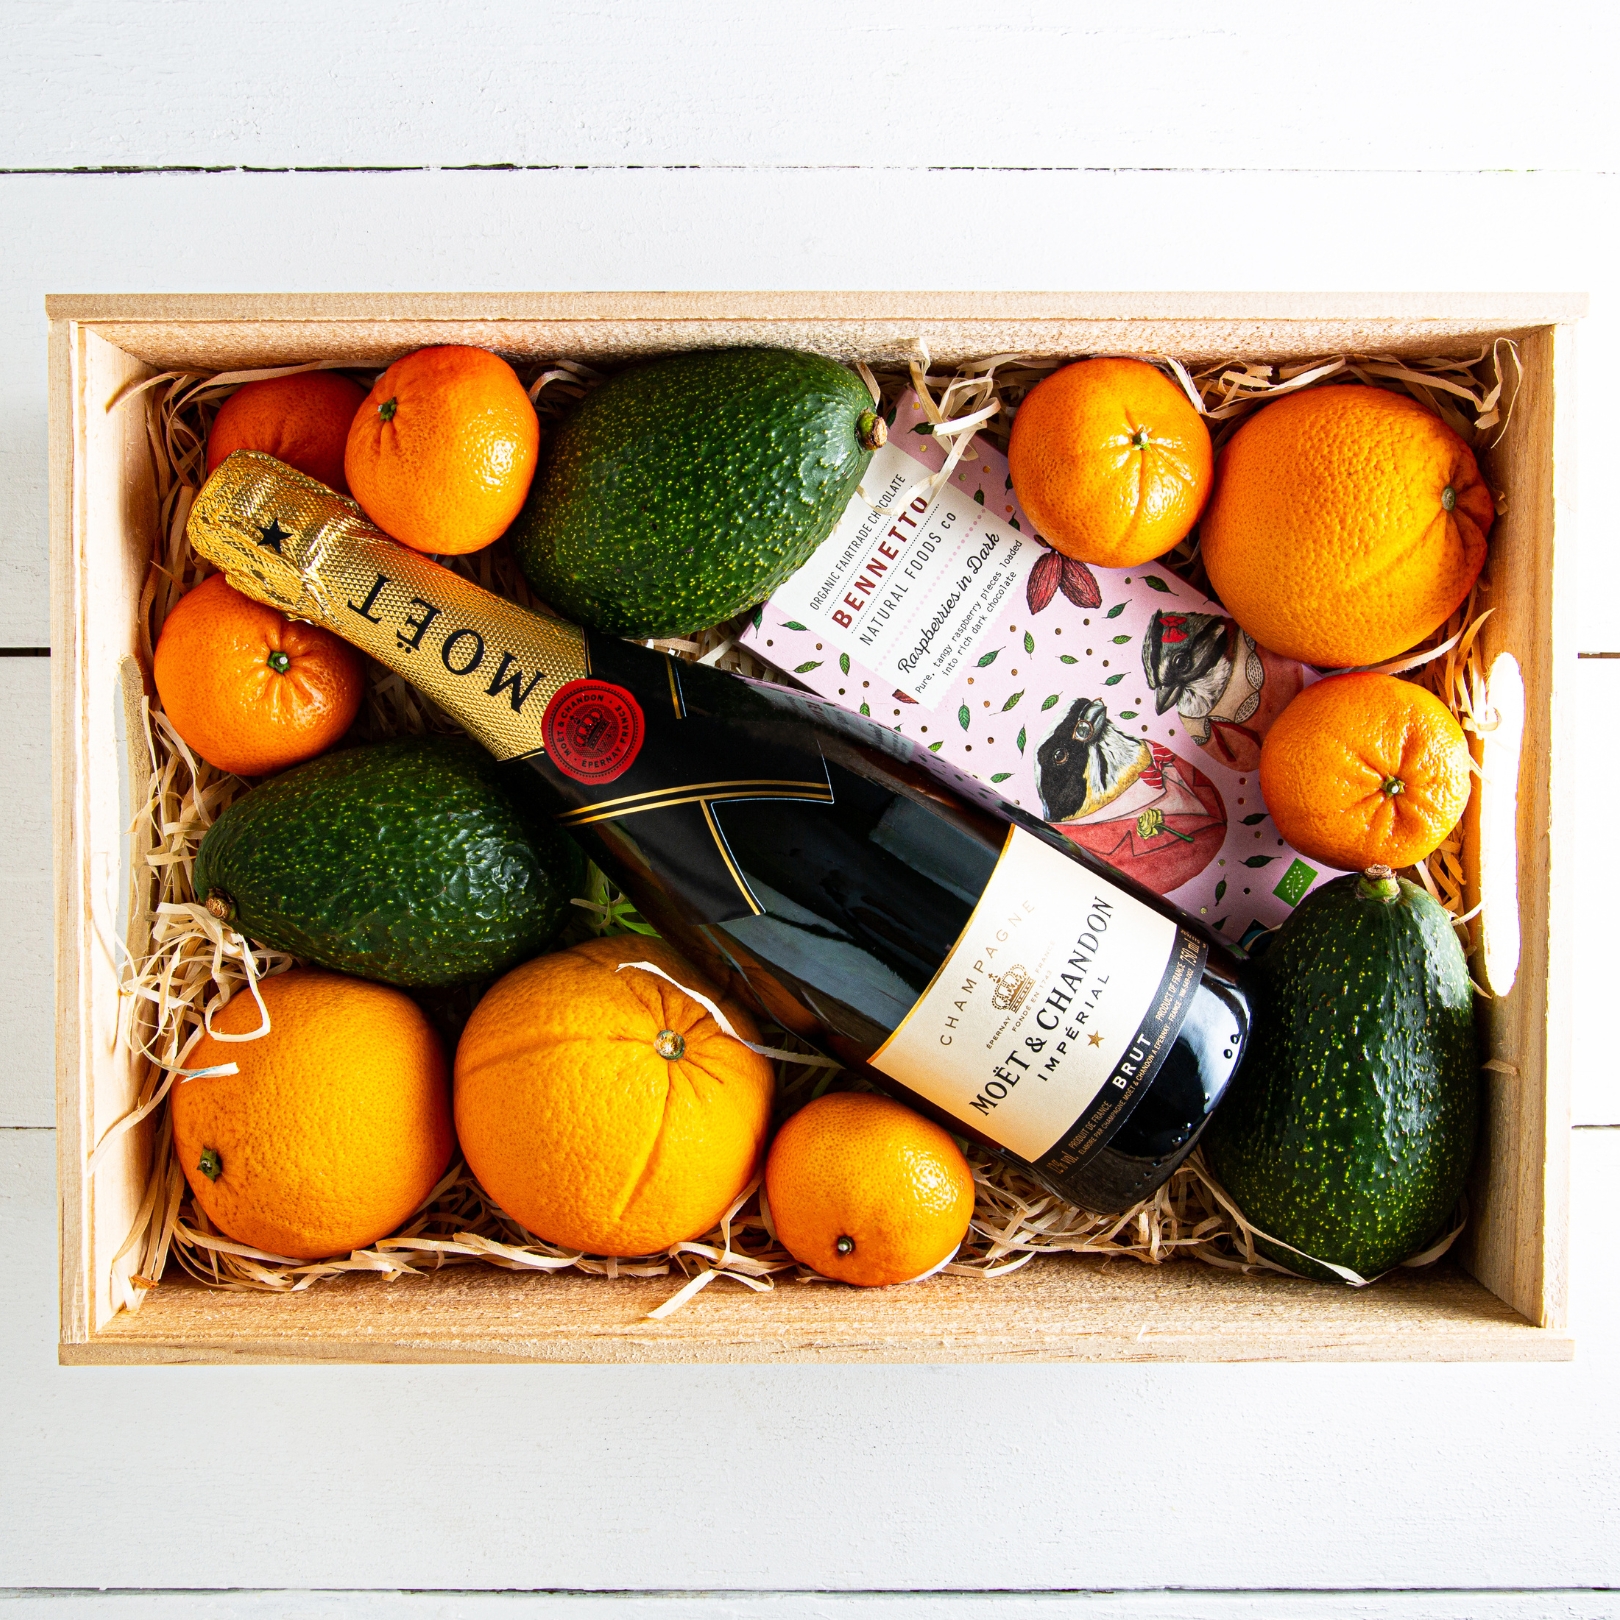 Buy The Bubbly - Champagne, Chocolate & Fruit Gift Box  Online NZ - Twisted Citrus